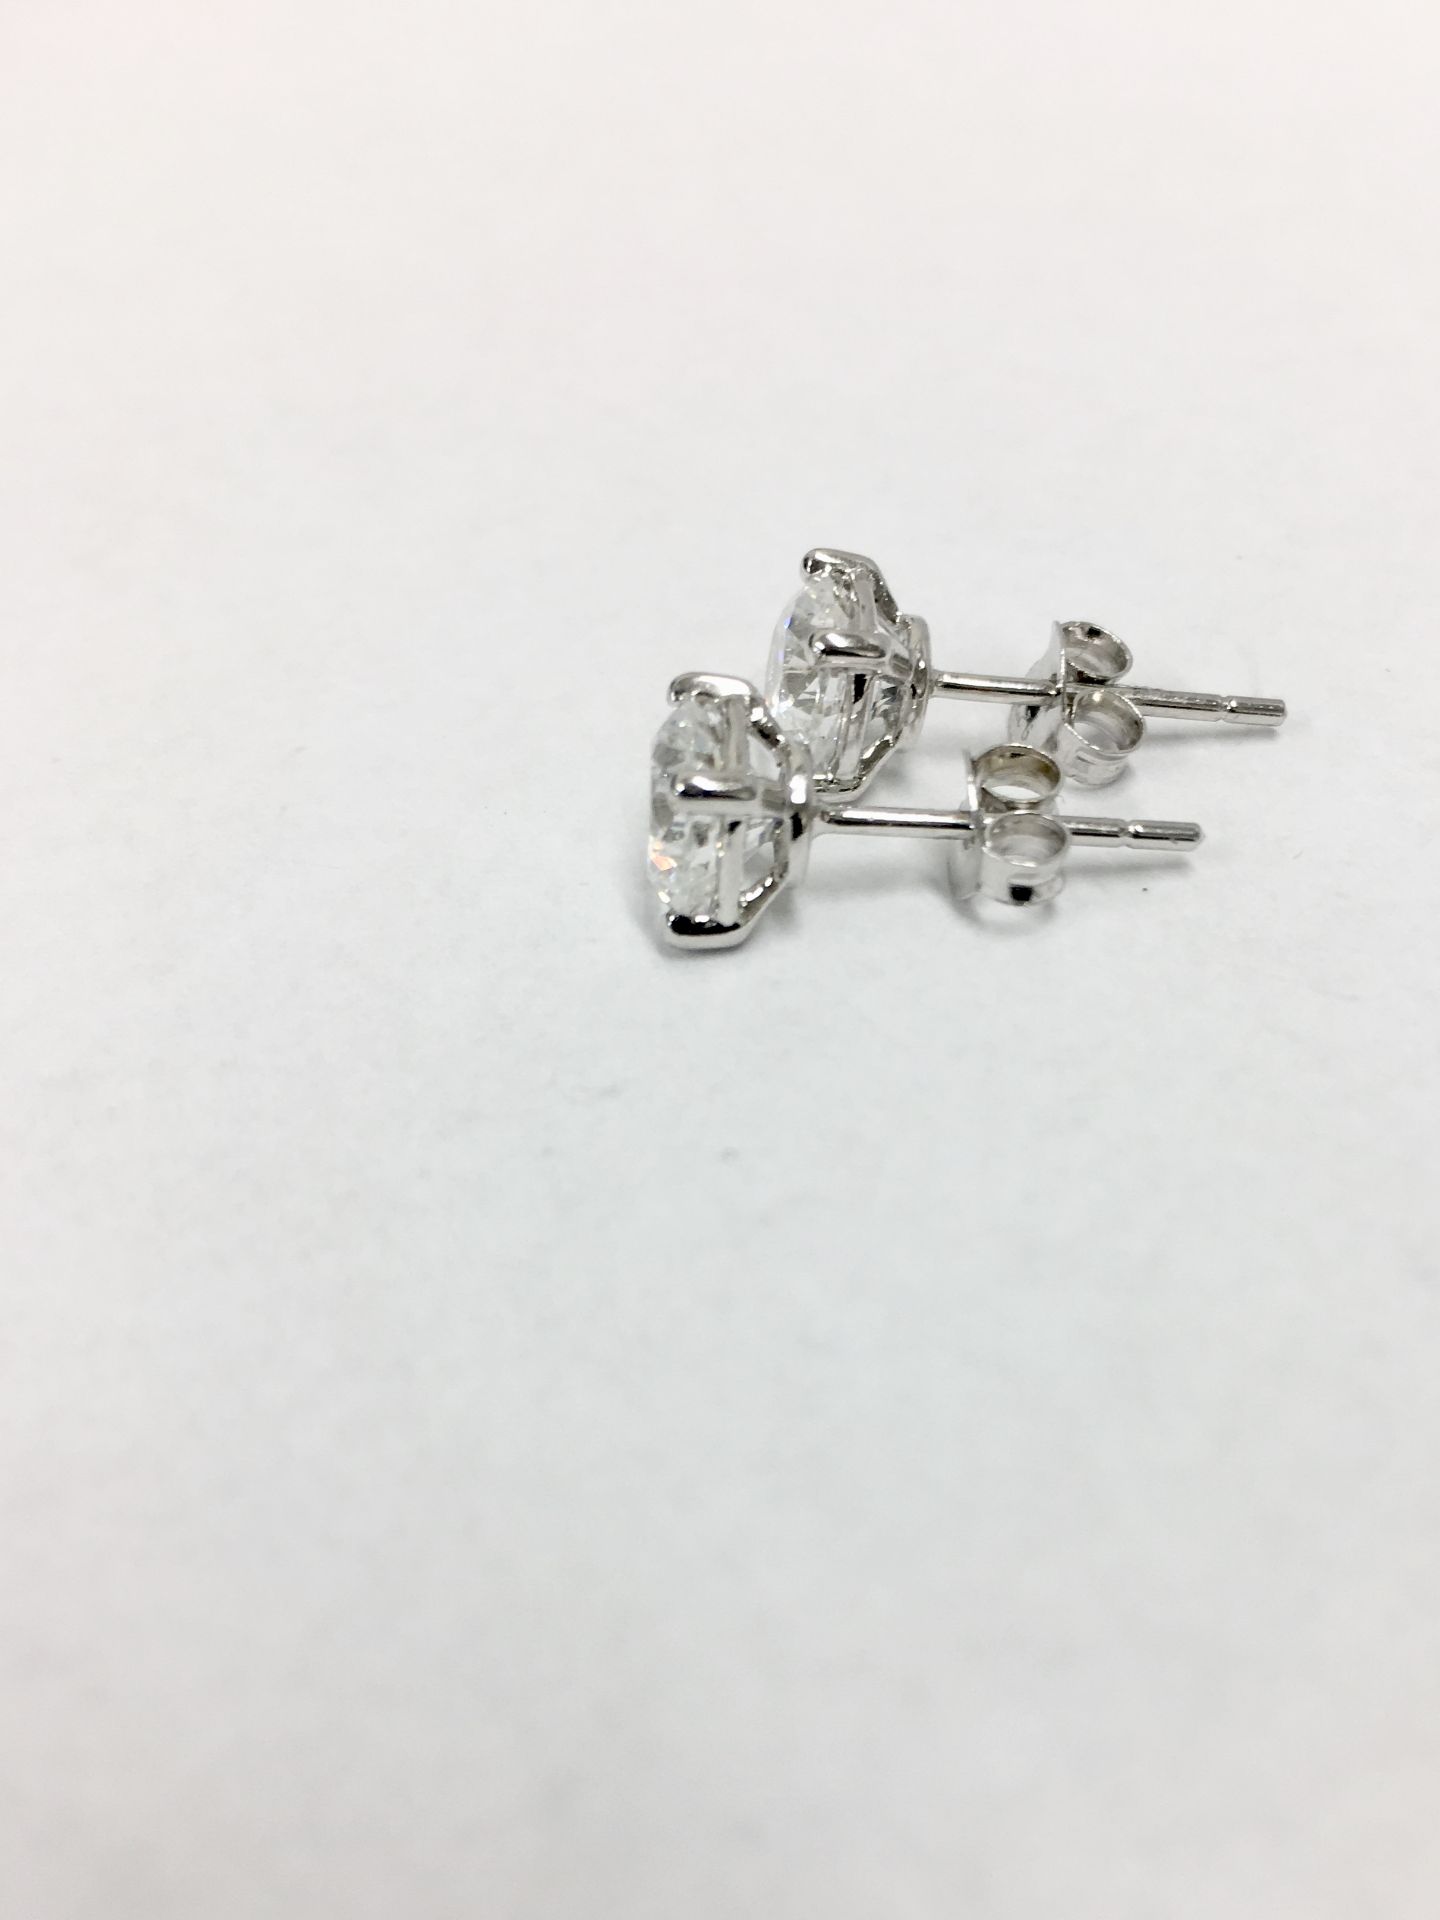 1.20ct diamond solitaire earrings set in 18ct white gold. 2 x brilliant cut diamonds, 0.60ct ( - Image 2 of 3